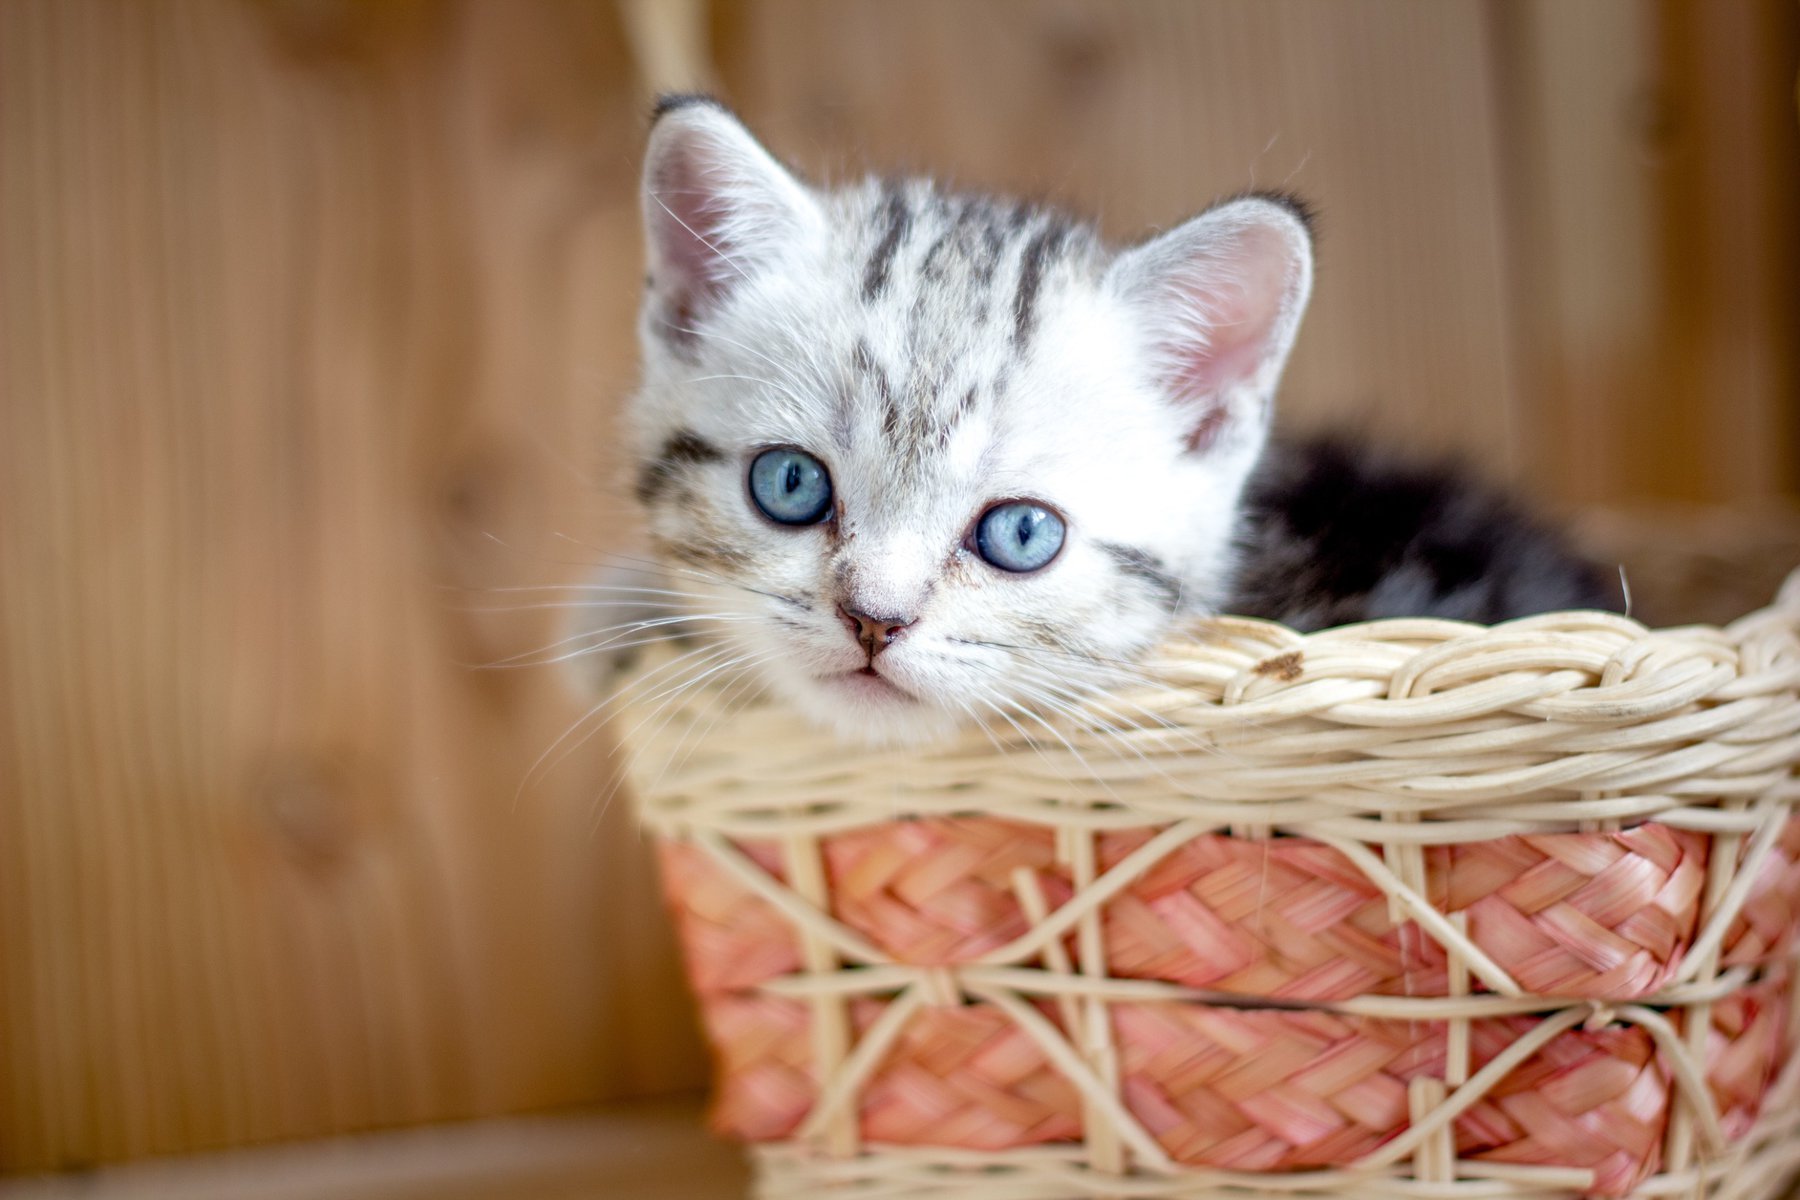 silver tabby kitten in a wicker basket, used to illustrate question "how long do house cats live"